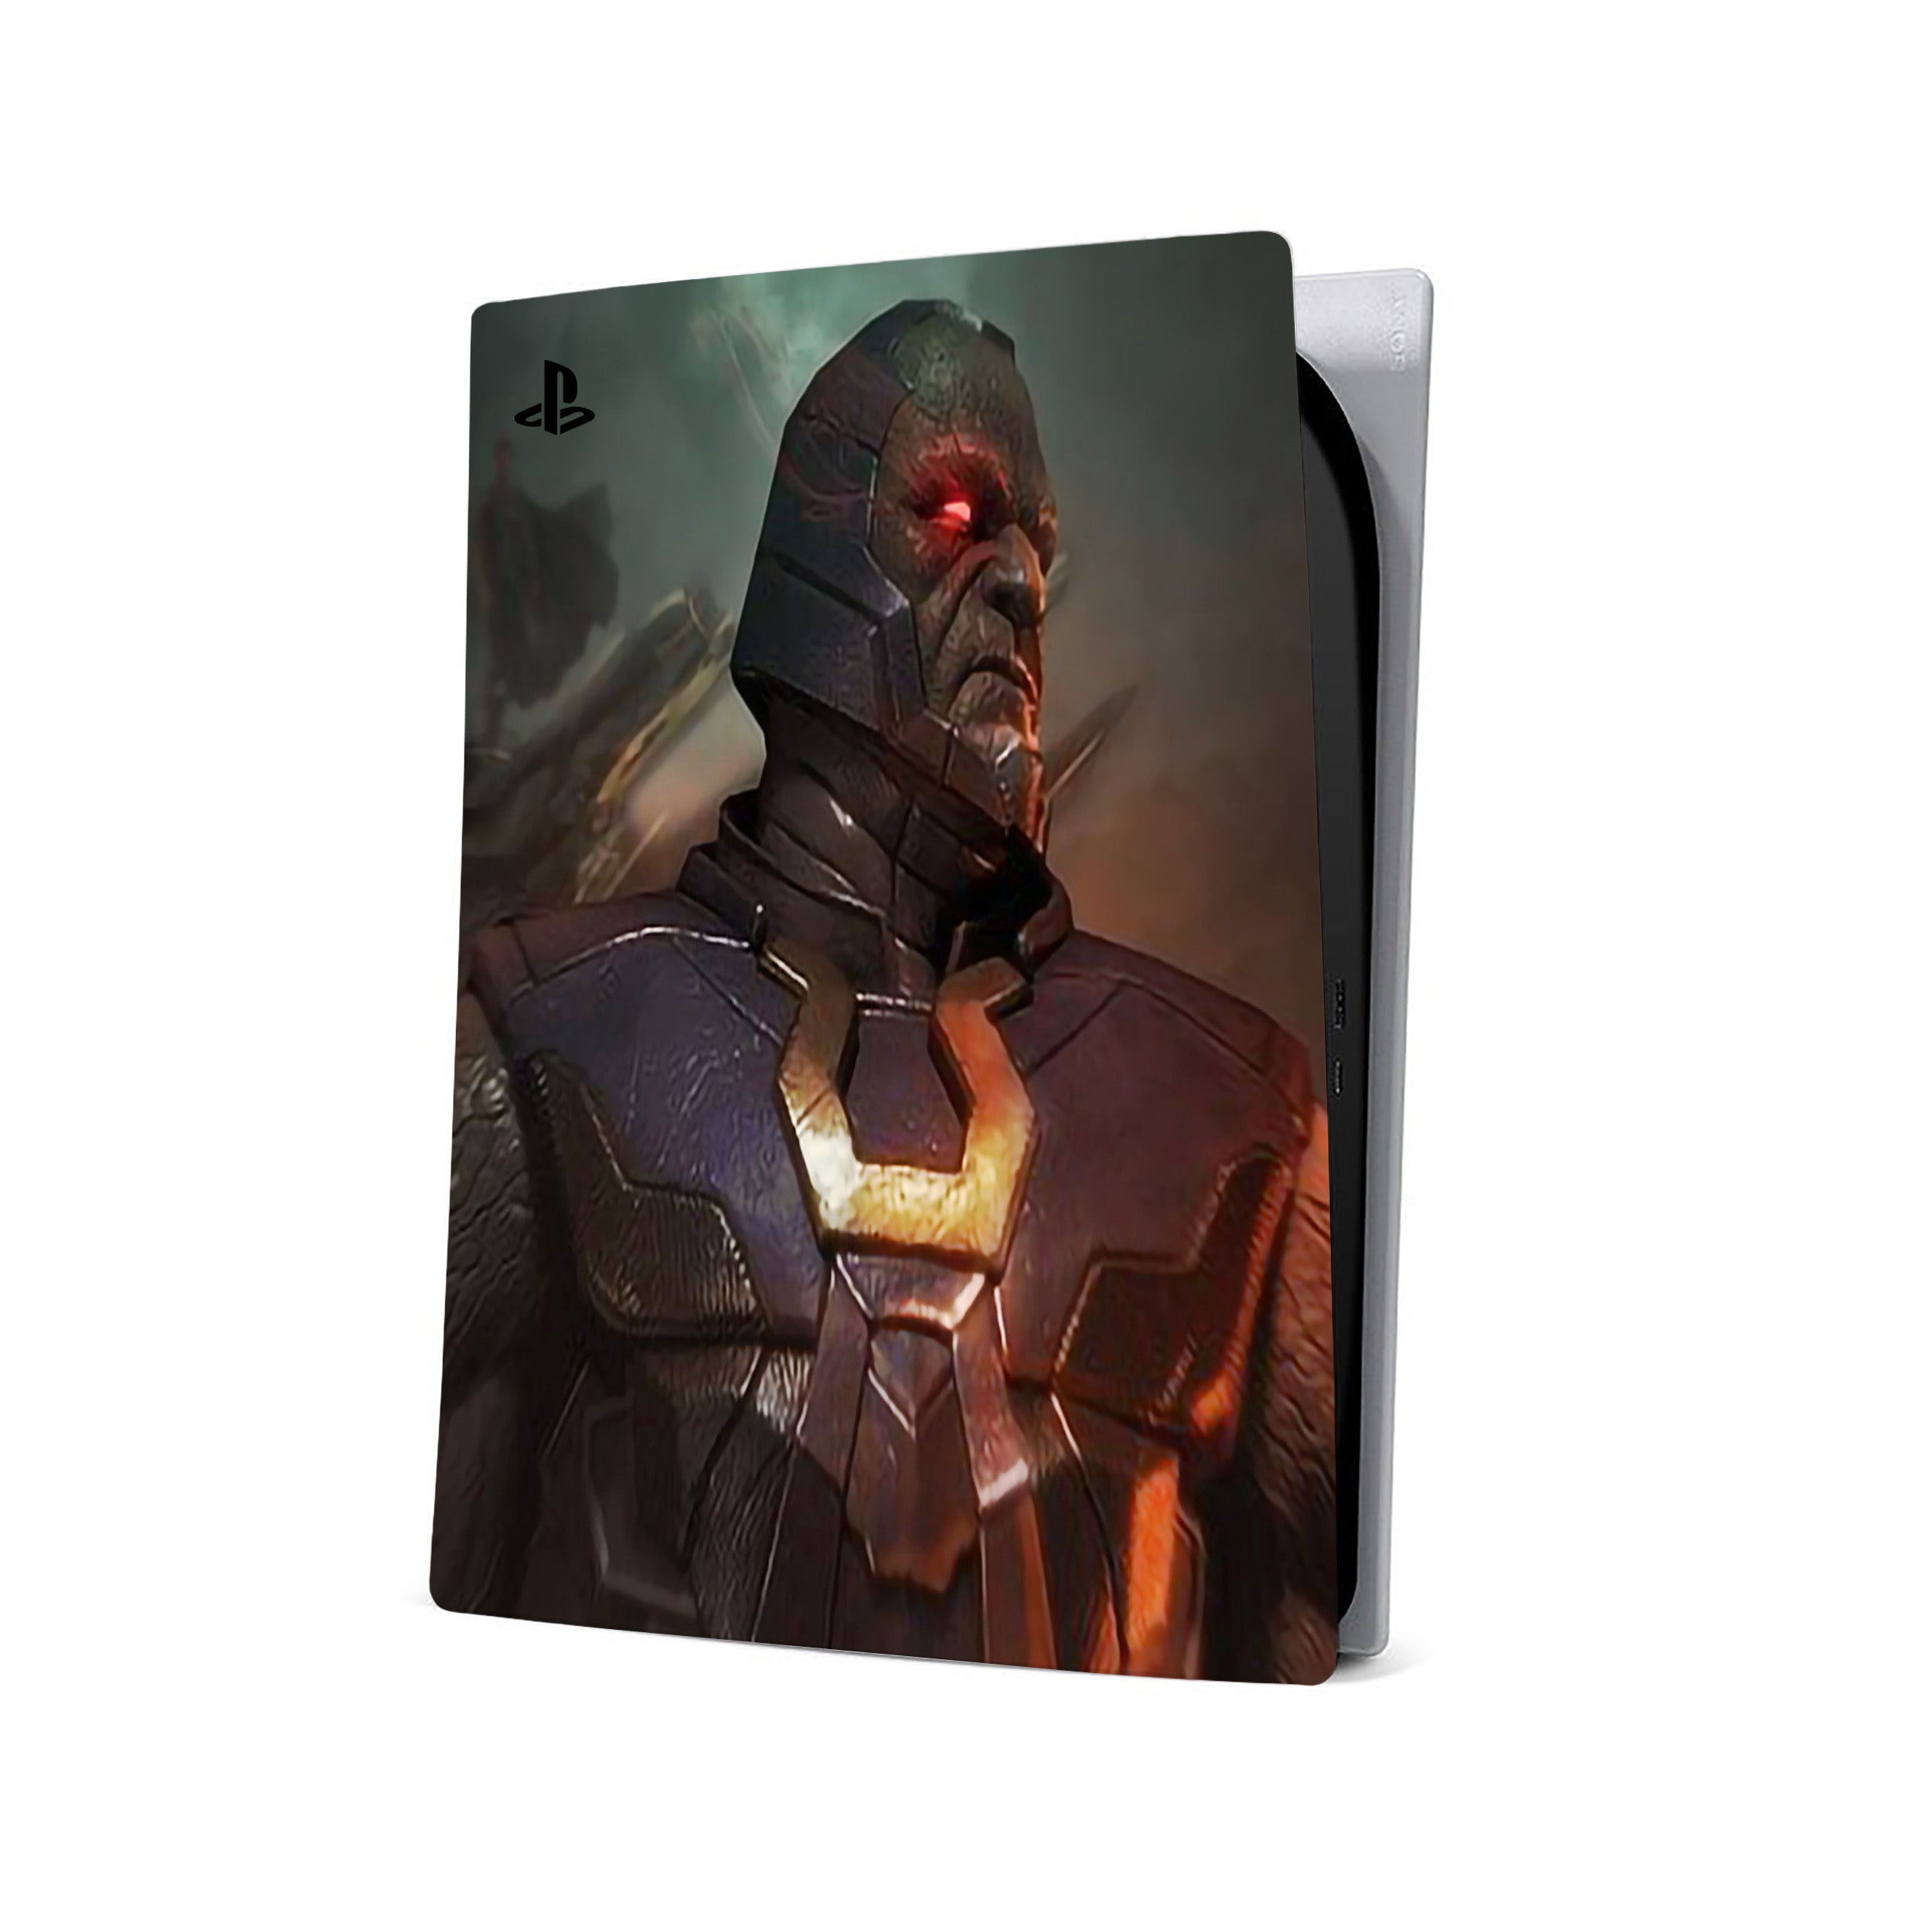 A video game skin featuring a DC Comics Darkseid design for the PS5.